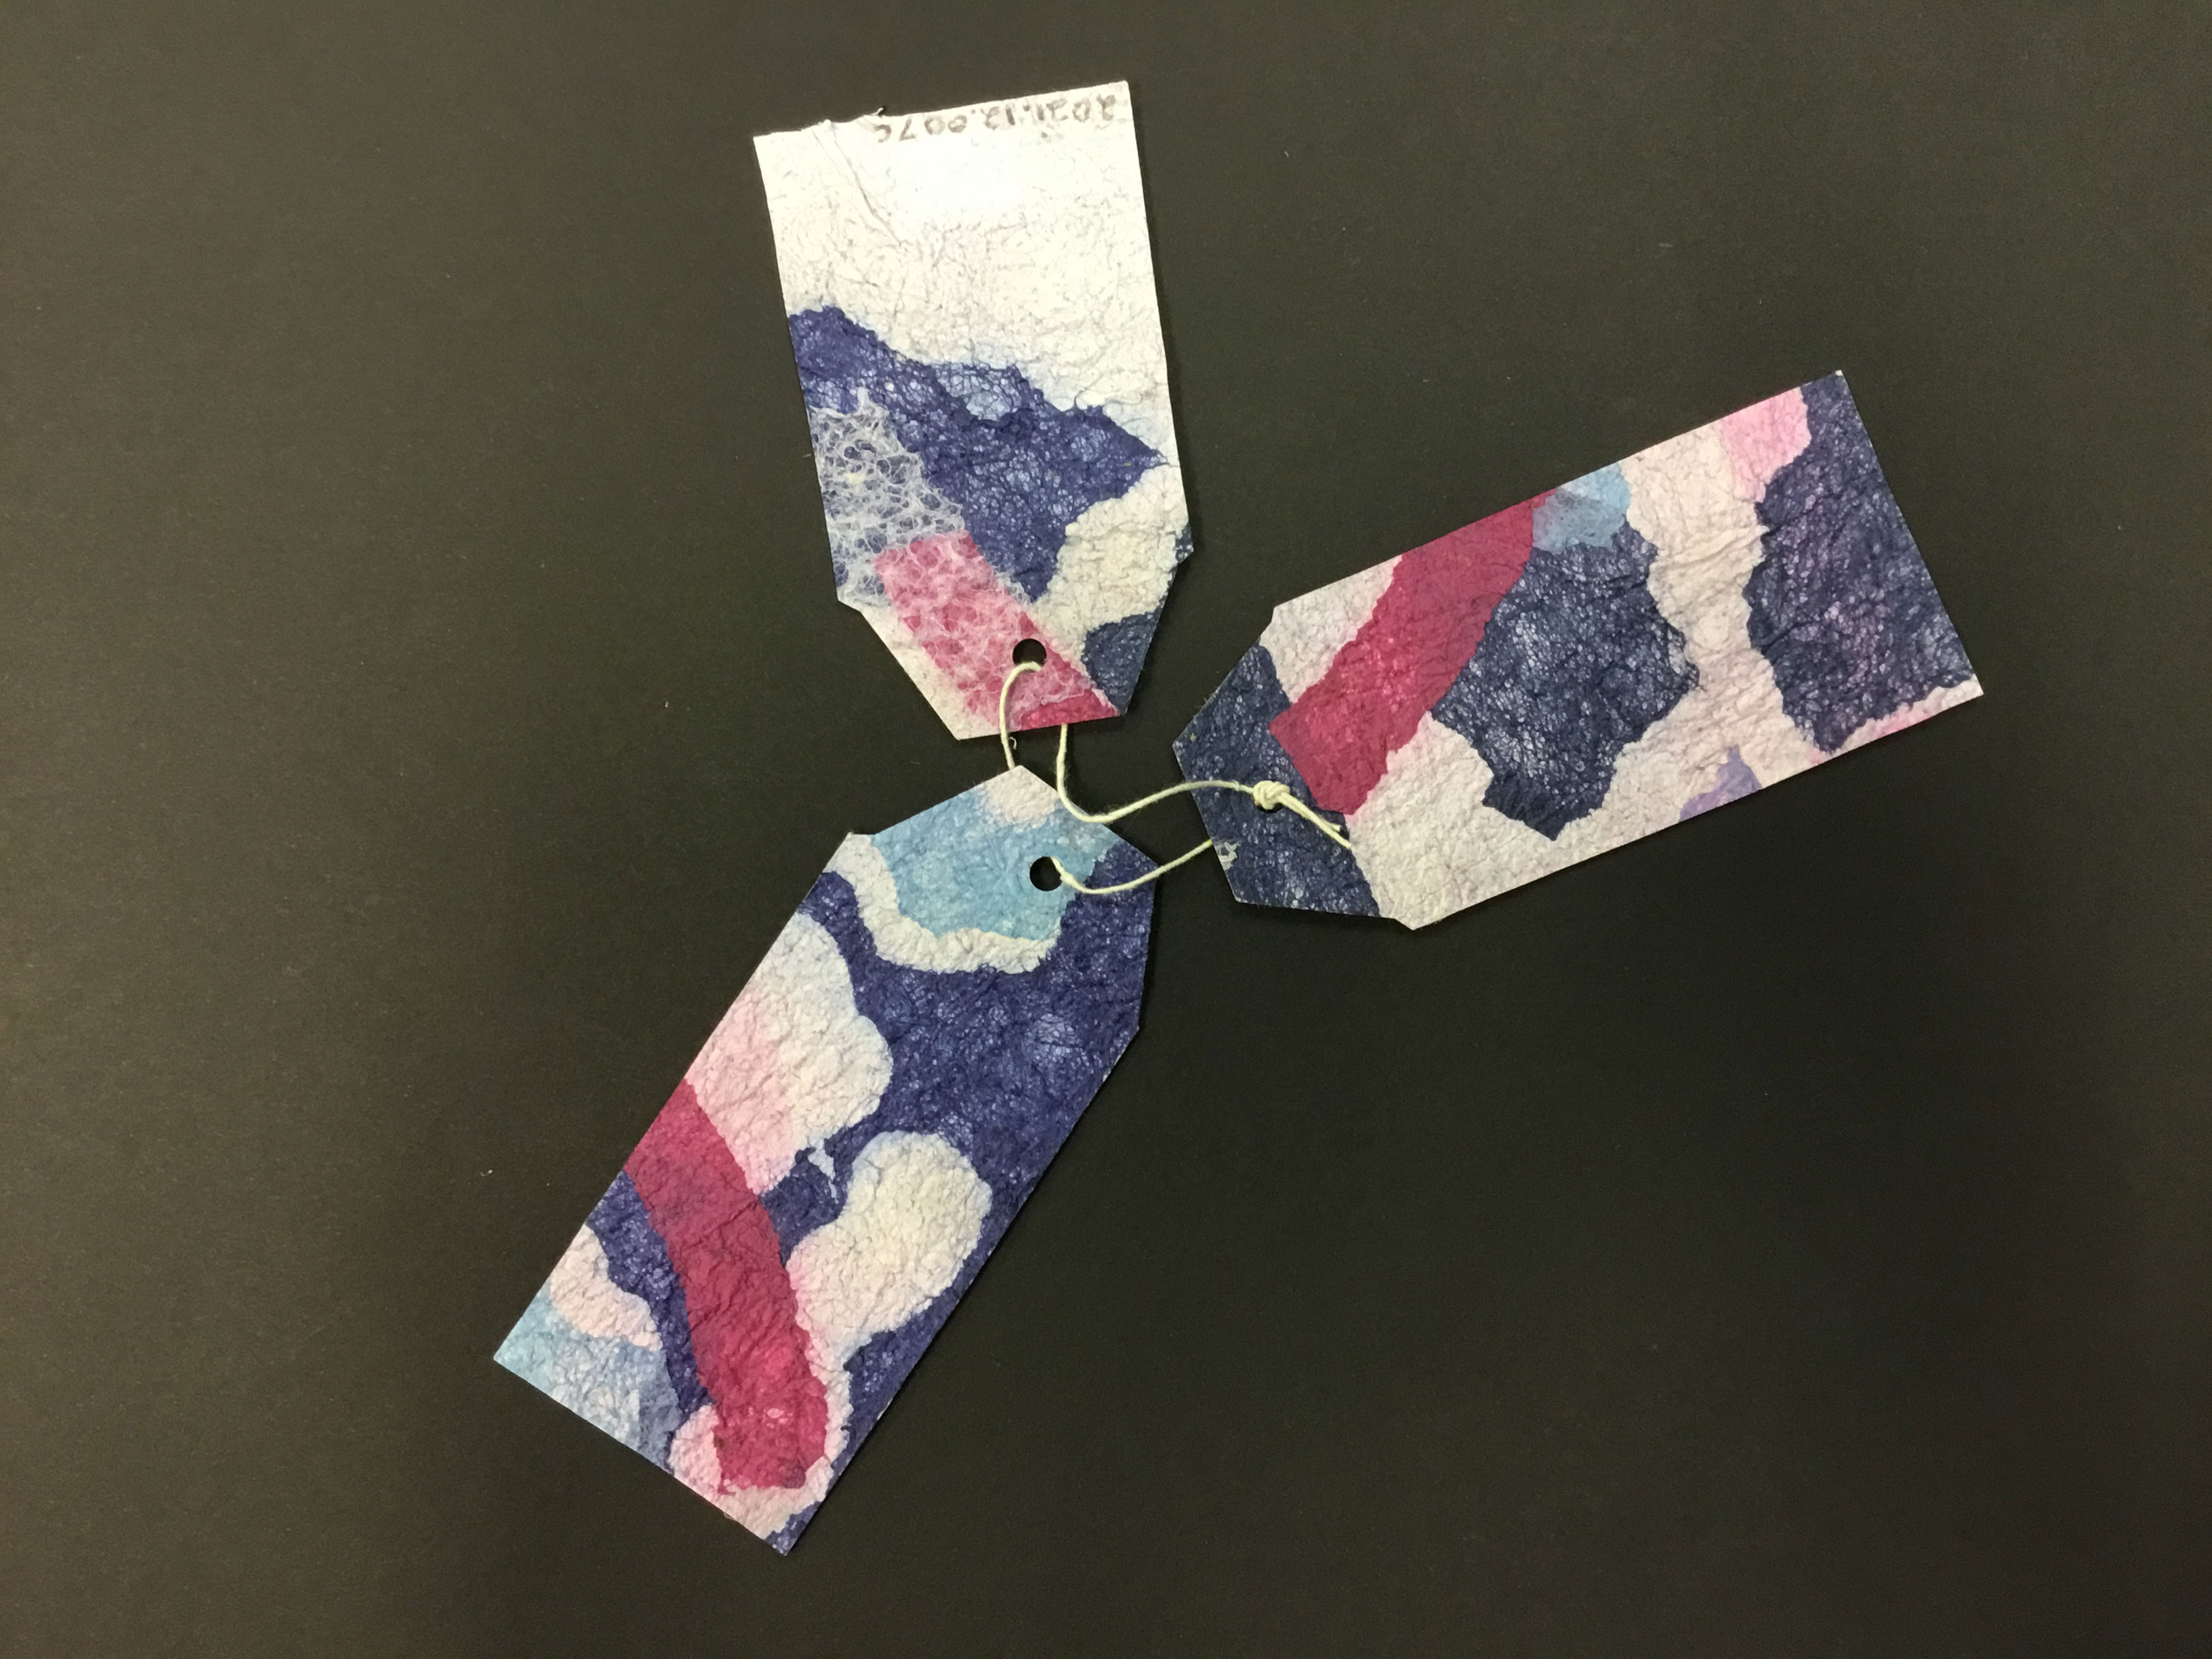 This piece is comprised of three handmade paper “tags” made from the Korean technique known as “joomchi” and created from mulberry paper. The tags are a variety of colors, including purple, blue, green, pink, brown, and white. According to the artist, the illustrations are meant to portray people and abstract suburban landscapes.